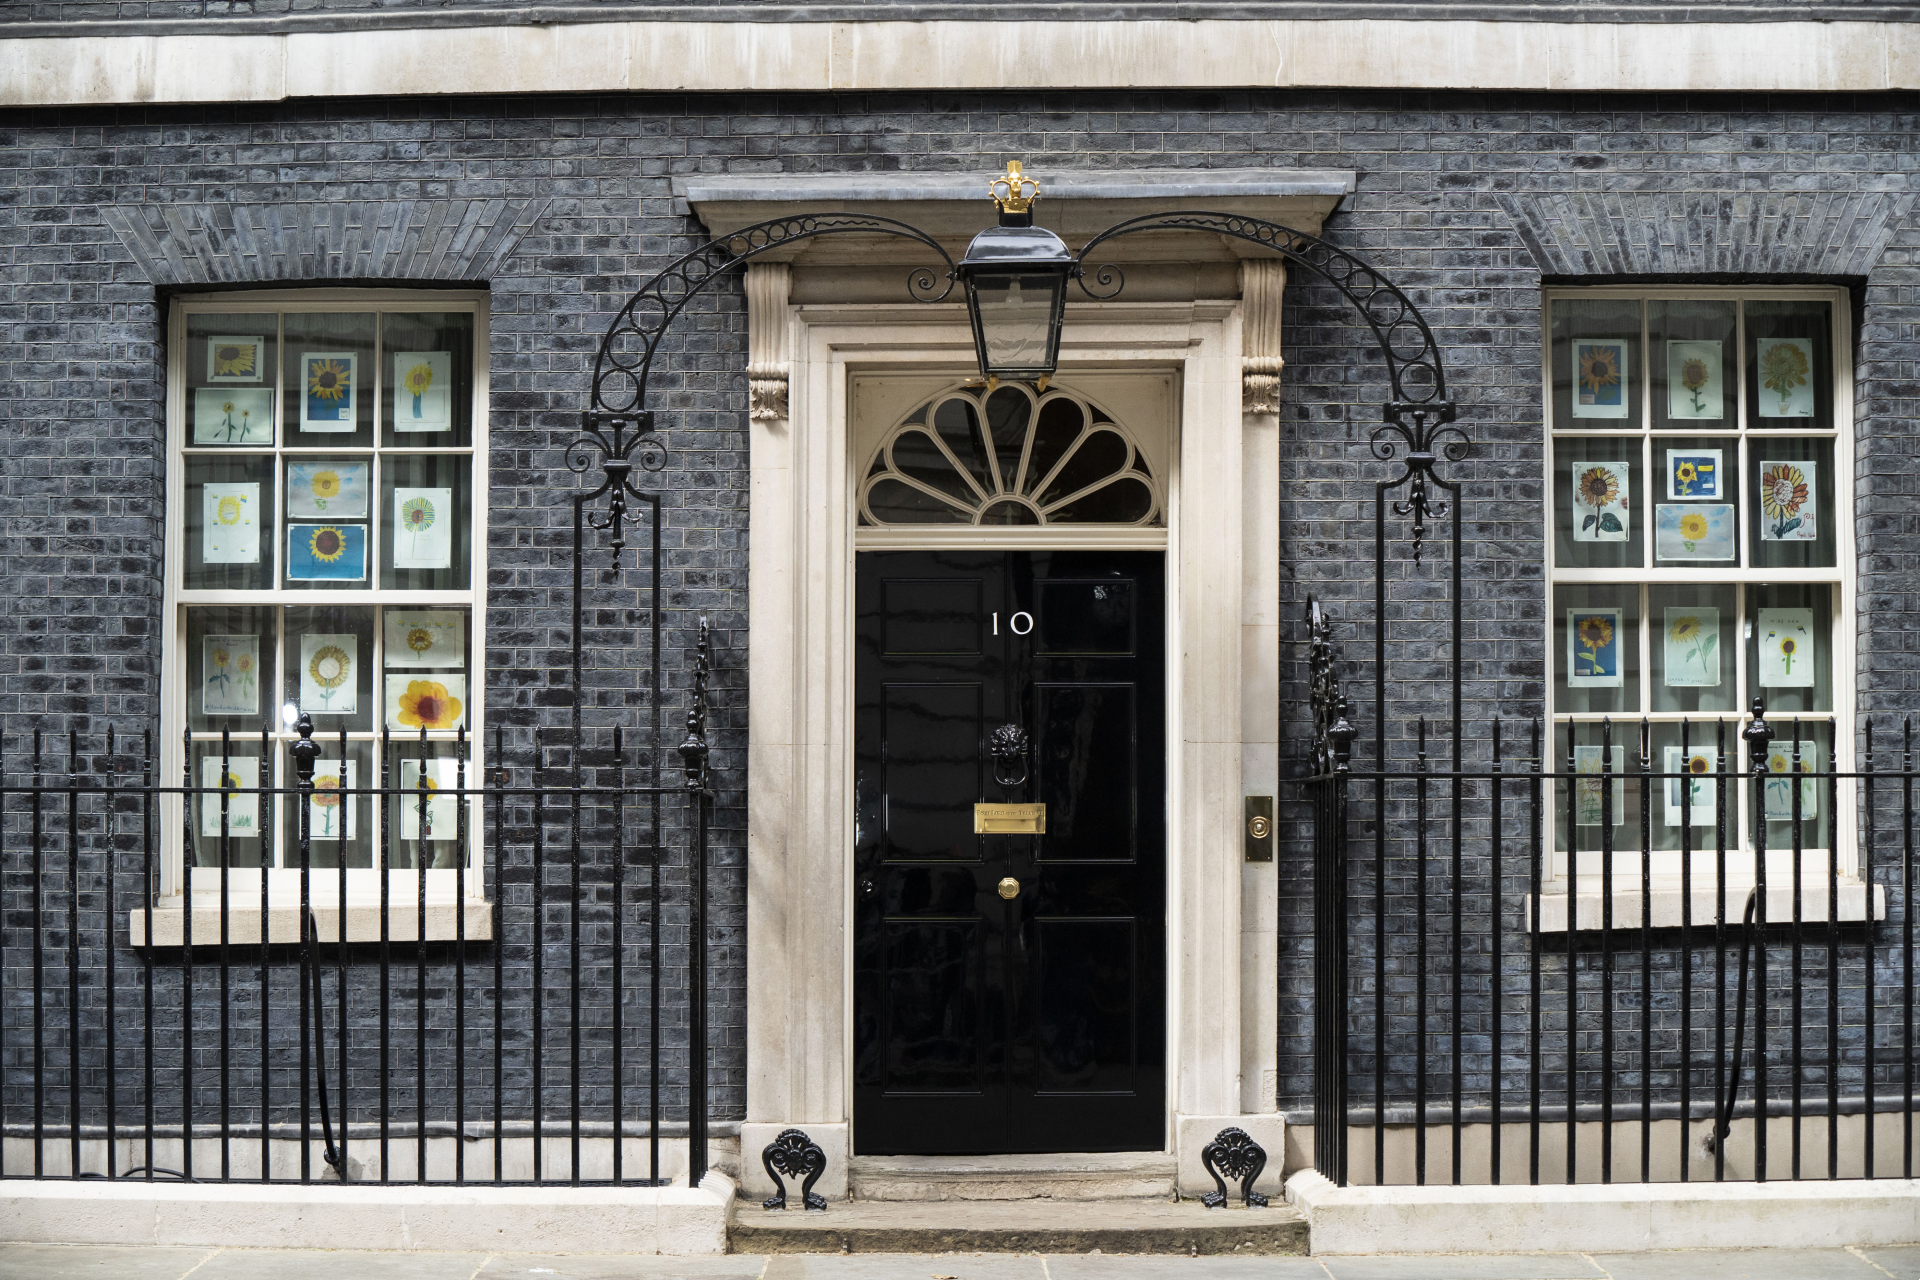 10 Downing Street on morning of 25 May